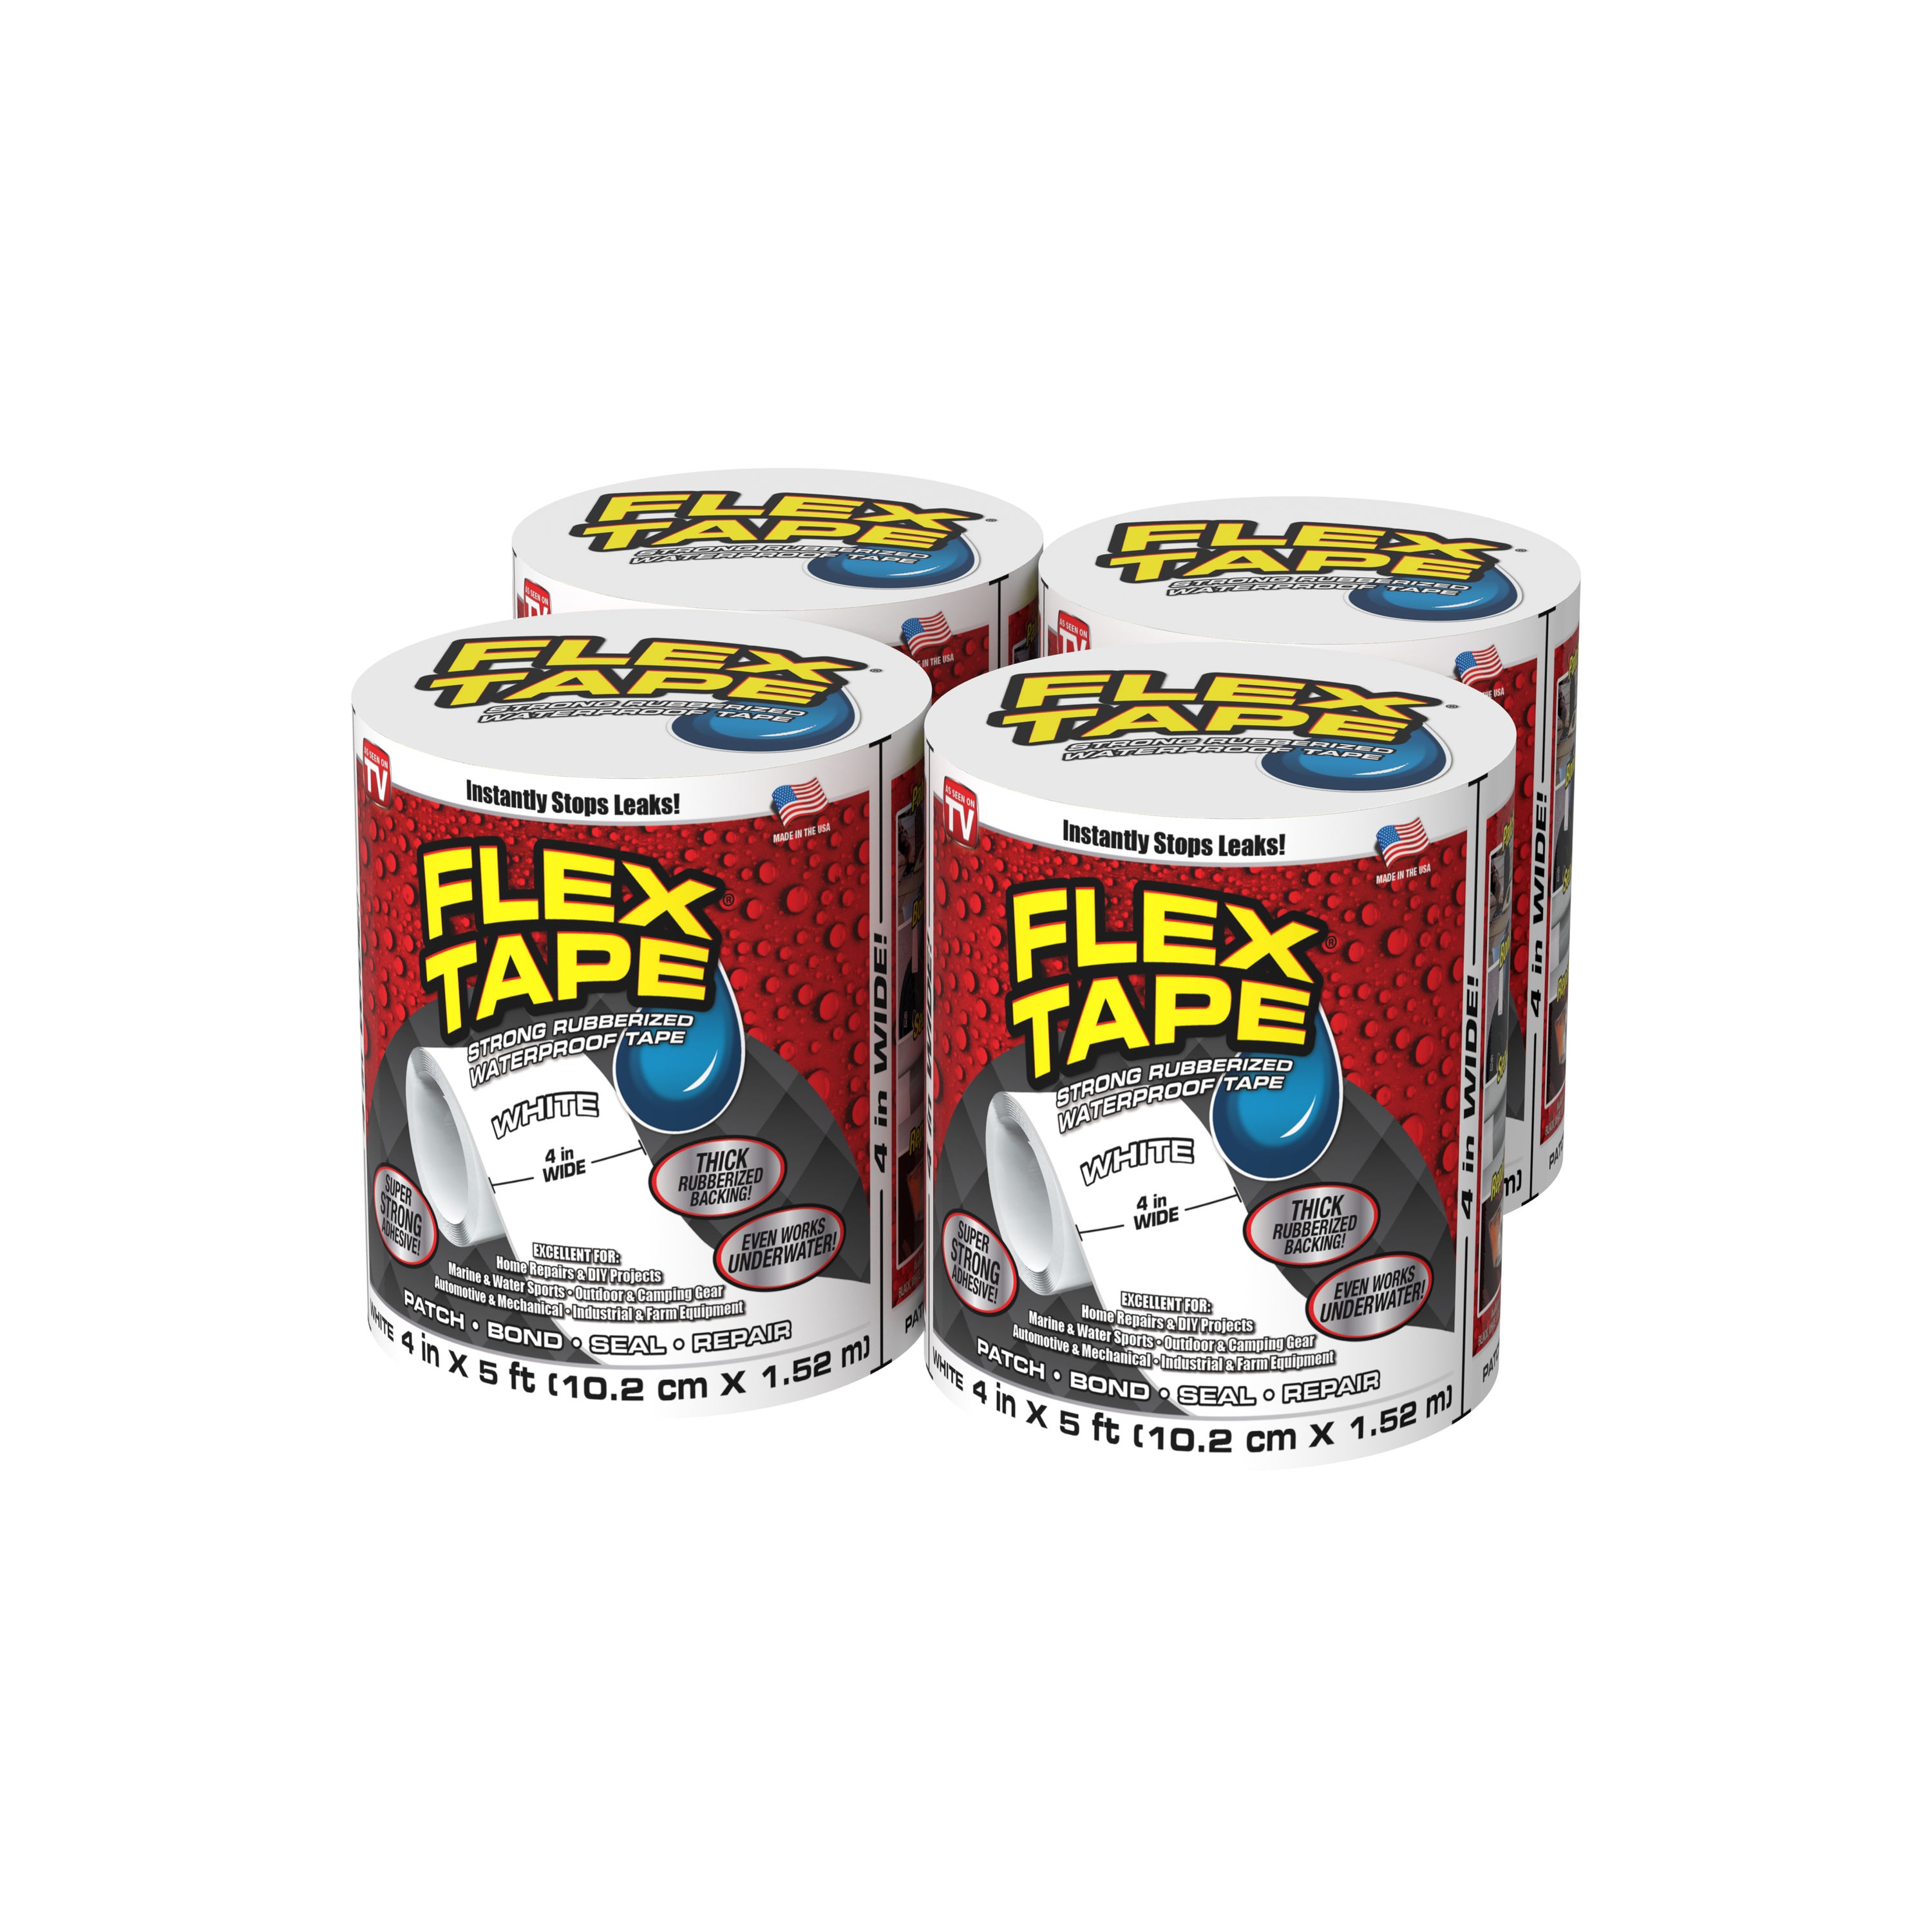 Flex Seal at Lowe's: Glues, Tapes, Sealants & More